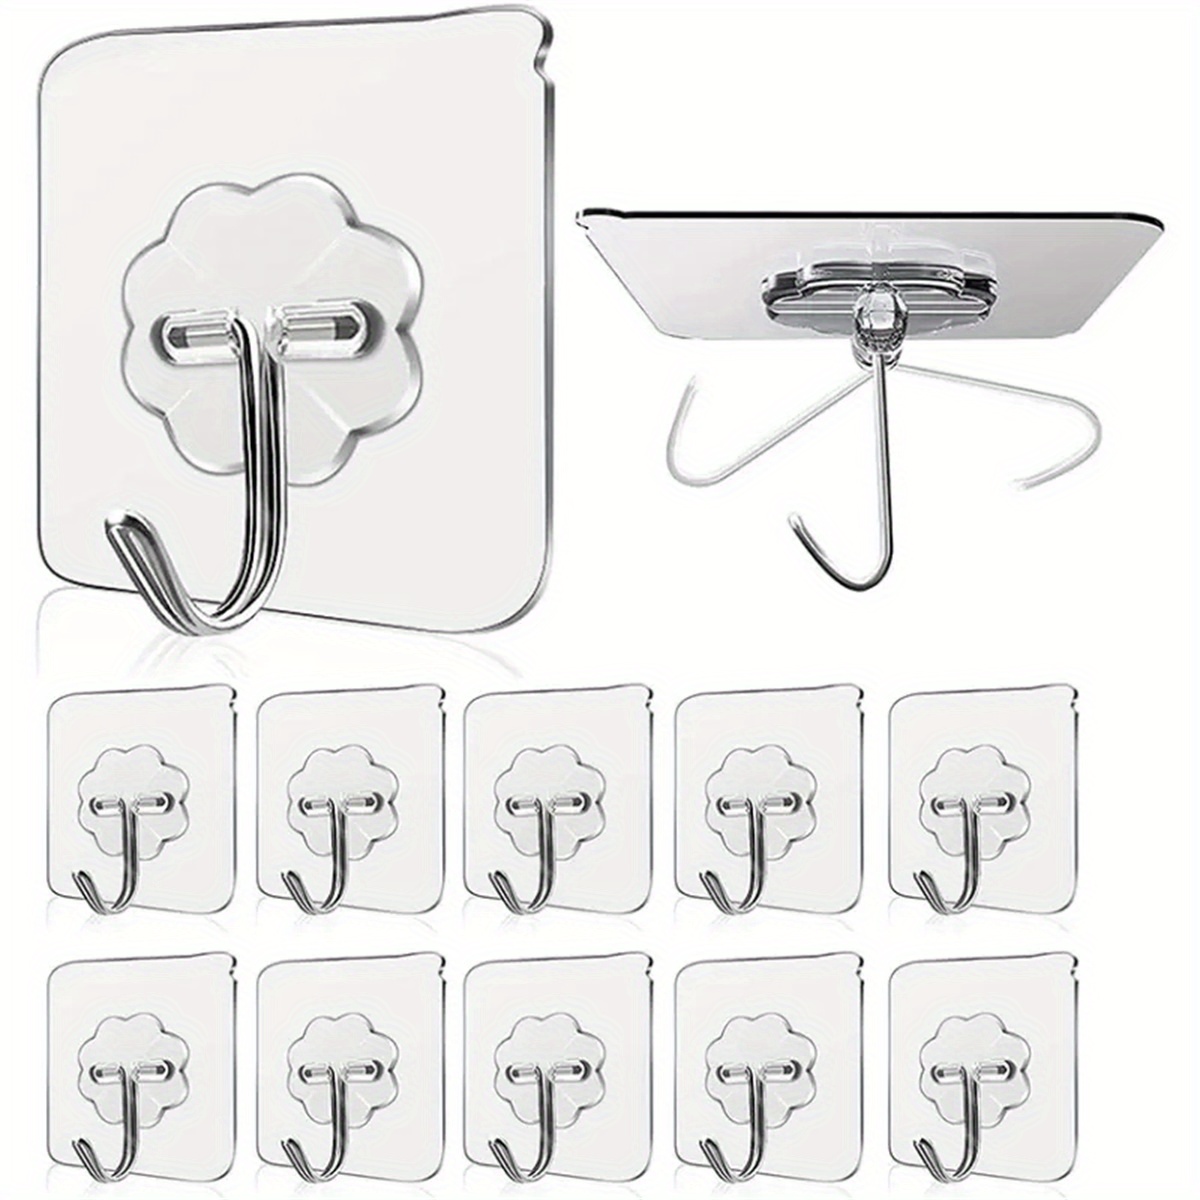 Adhesive Wall Hooks - Pack of 20, No-Nail Wall Hangers for Bathroom,  Bedroom, an